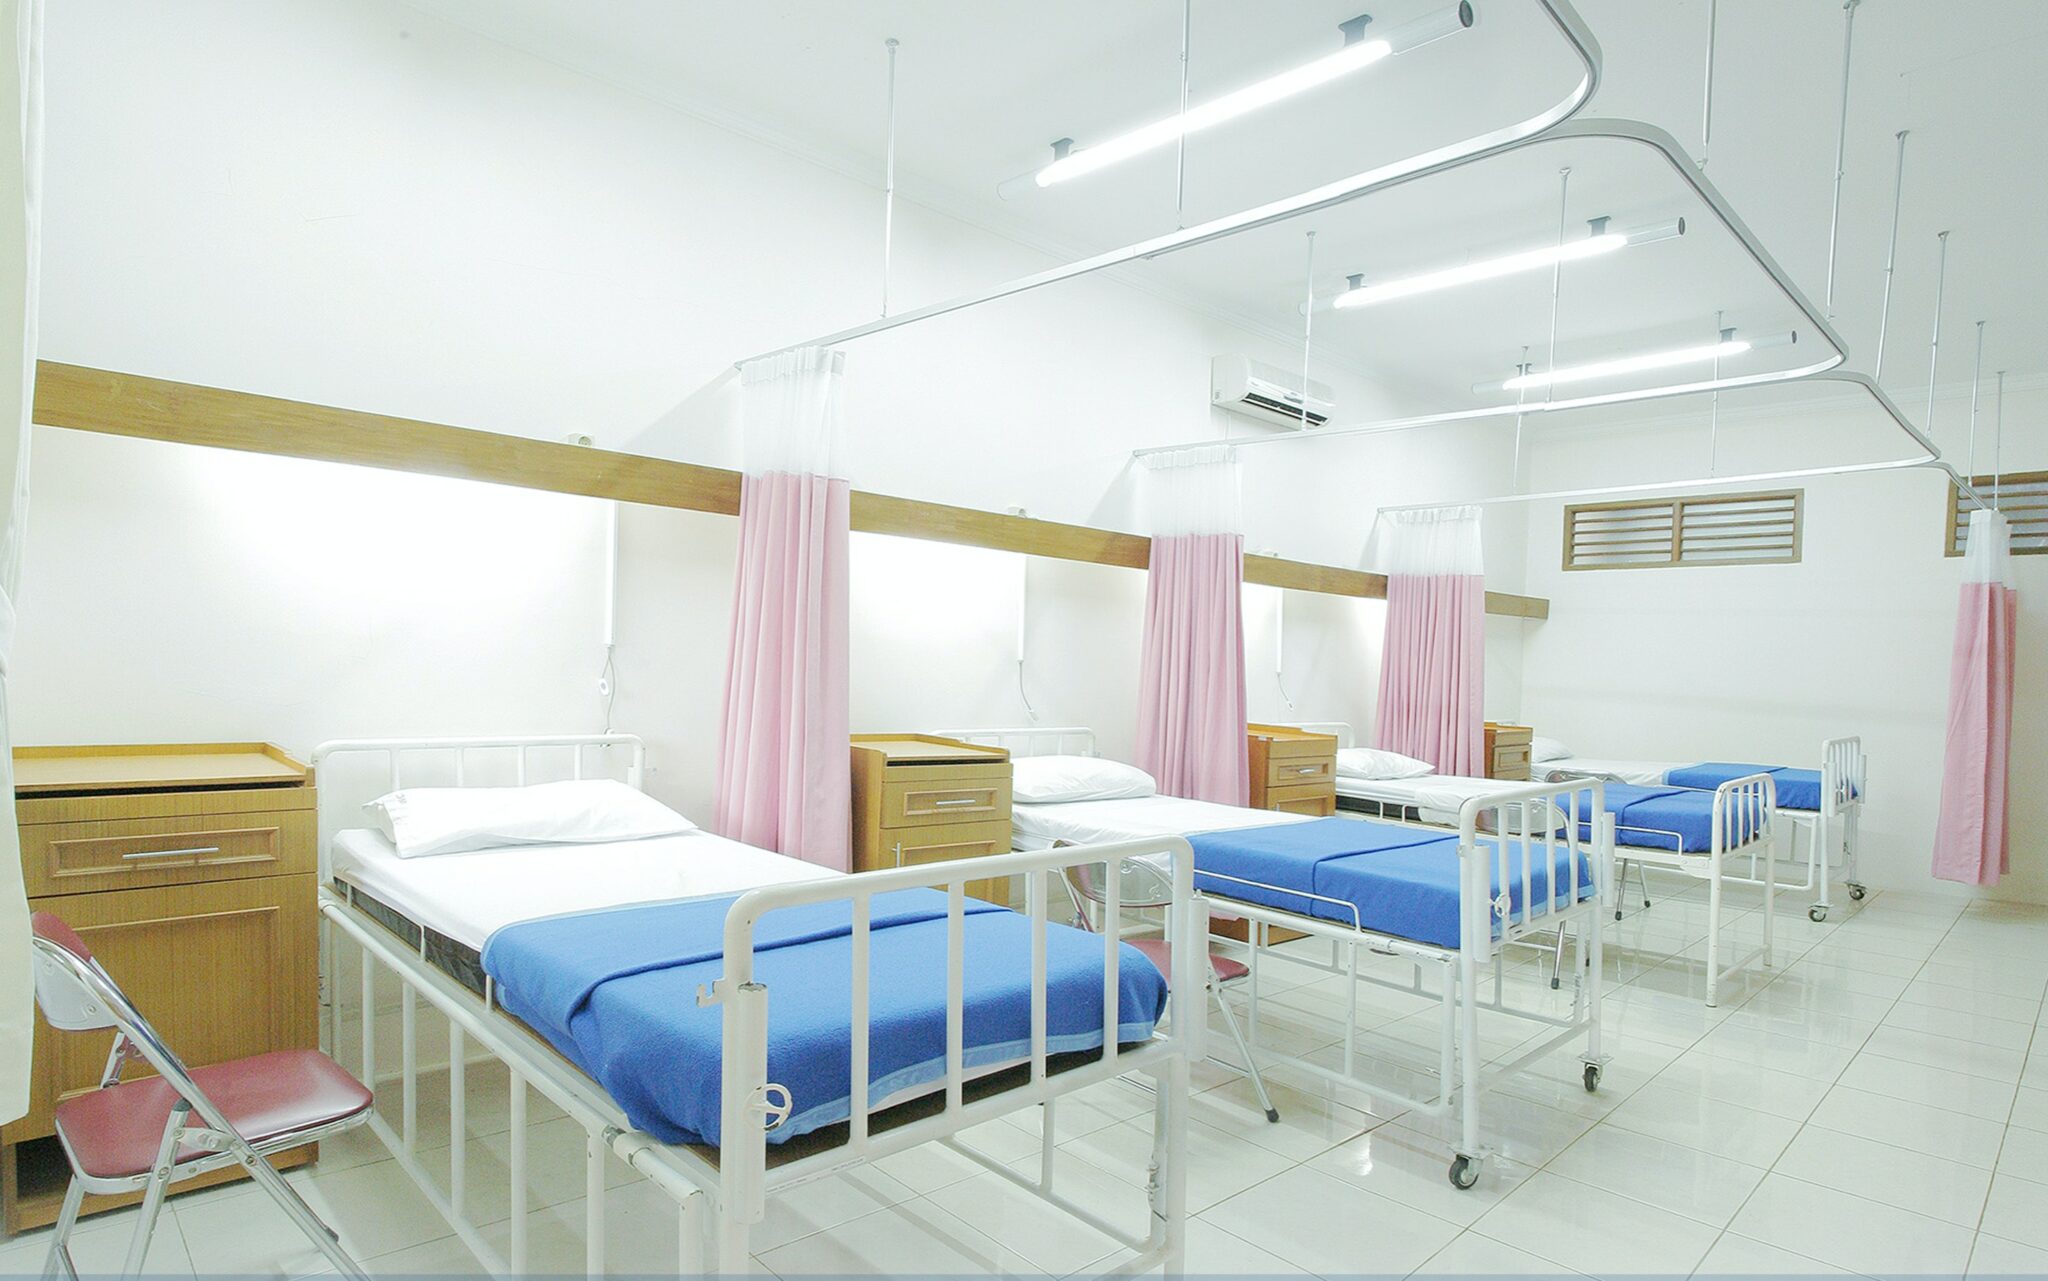 Hospital beds sanitized using ultraviolet cleaning solution systems